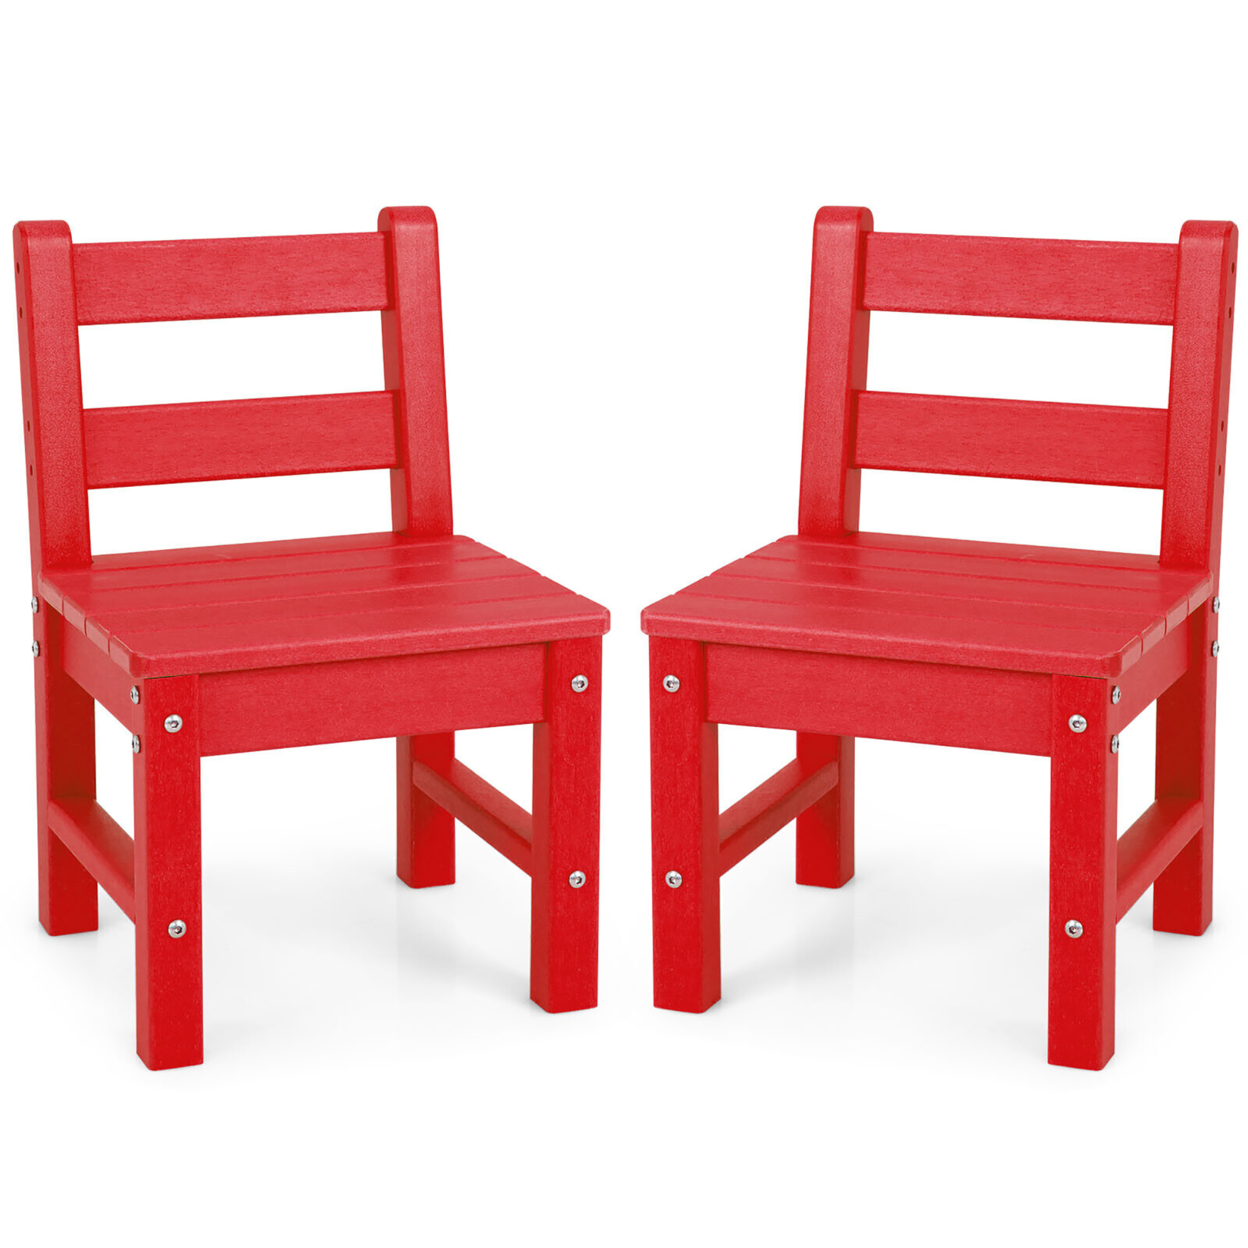 2 PCS Kids Chairs Indoor Outdoor Heavy-Duty All-Weather Children Learning Chair - Red